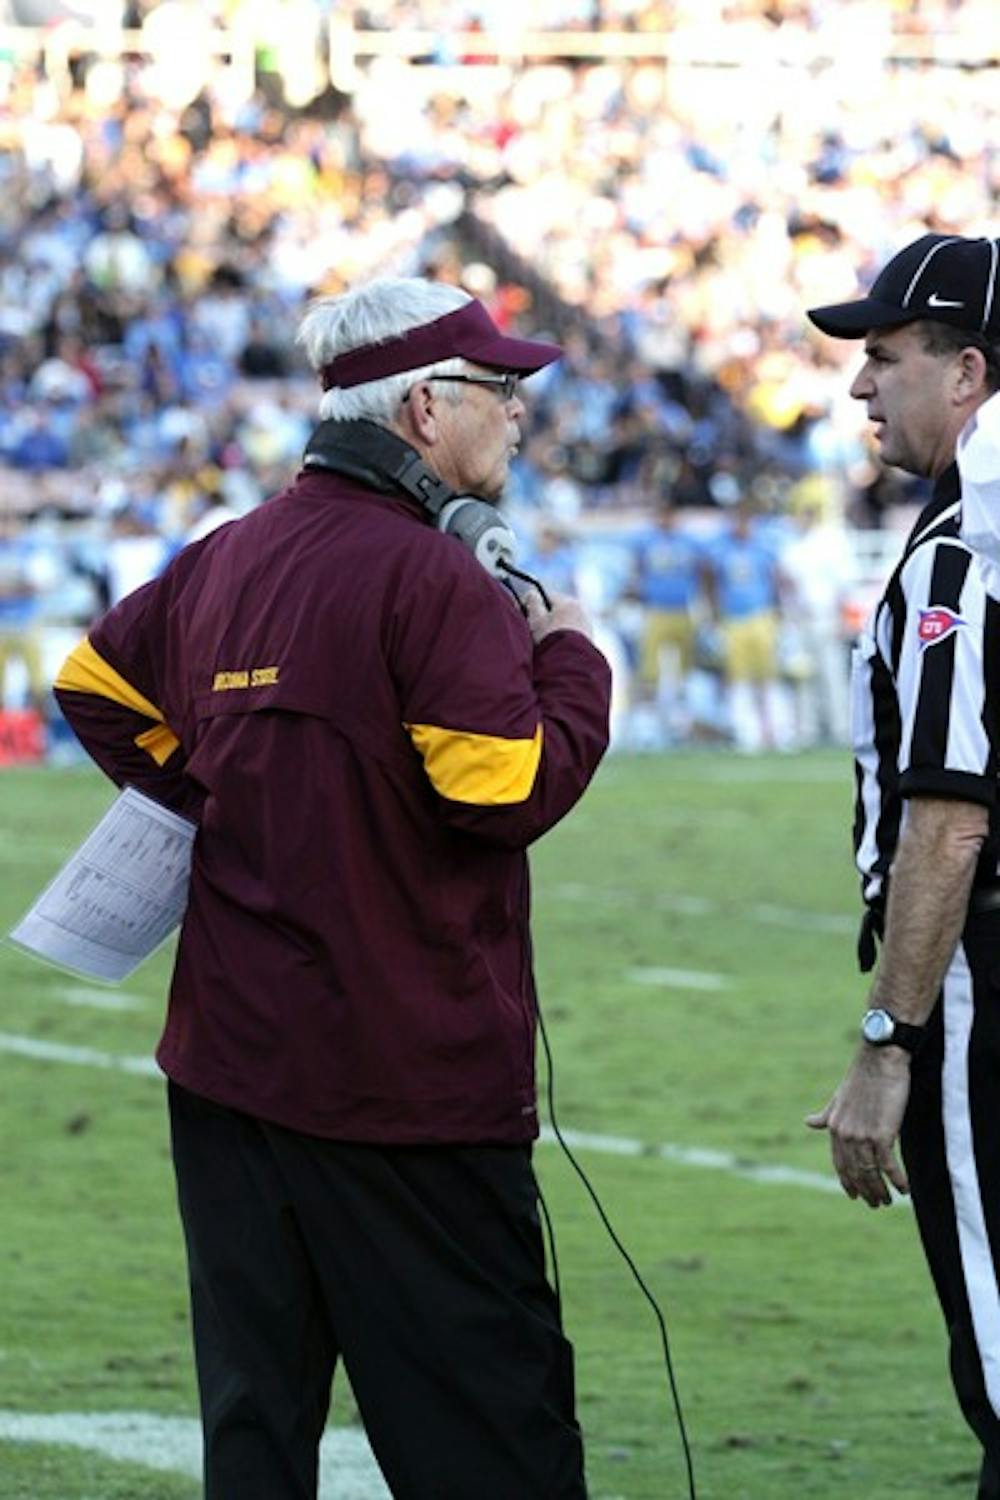 TAKING BLAME: ASU coach Dennis Erickson argues with a referee during the second quarter of the Sun Devils’ loss to UCLA on Saturday. Erickson took some of the blame for the defeat with clock mismanagement in the fourth quarter. (Photo by Elijah Grasser)